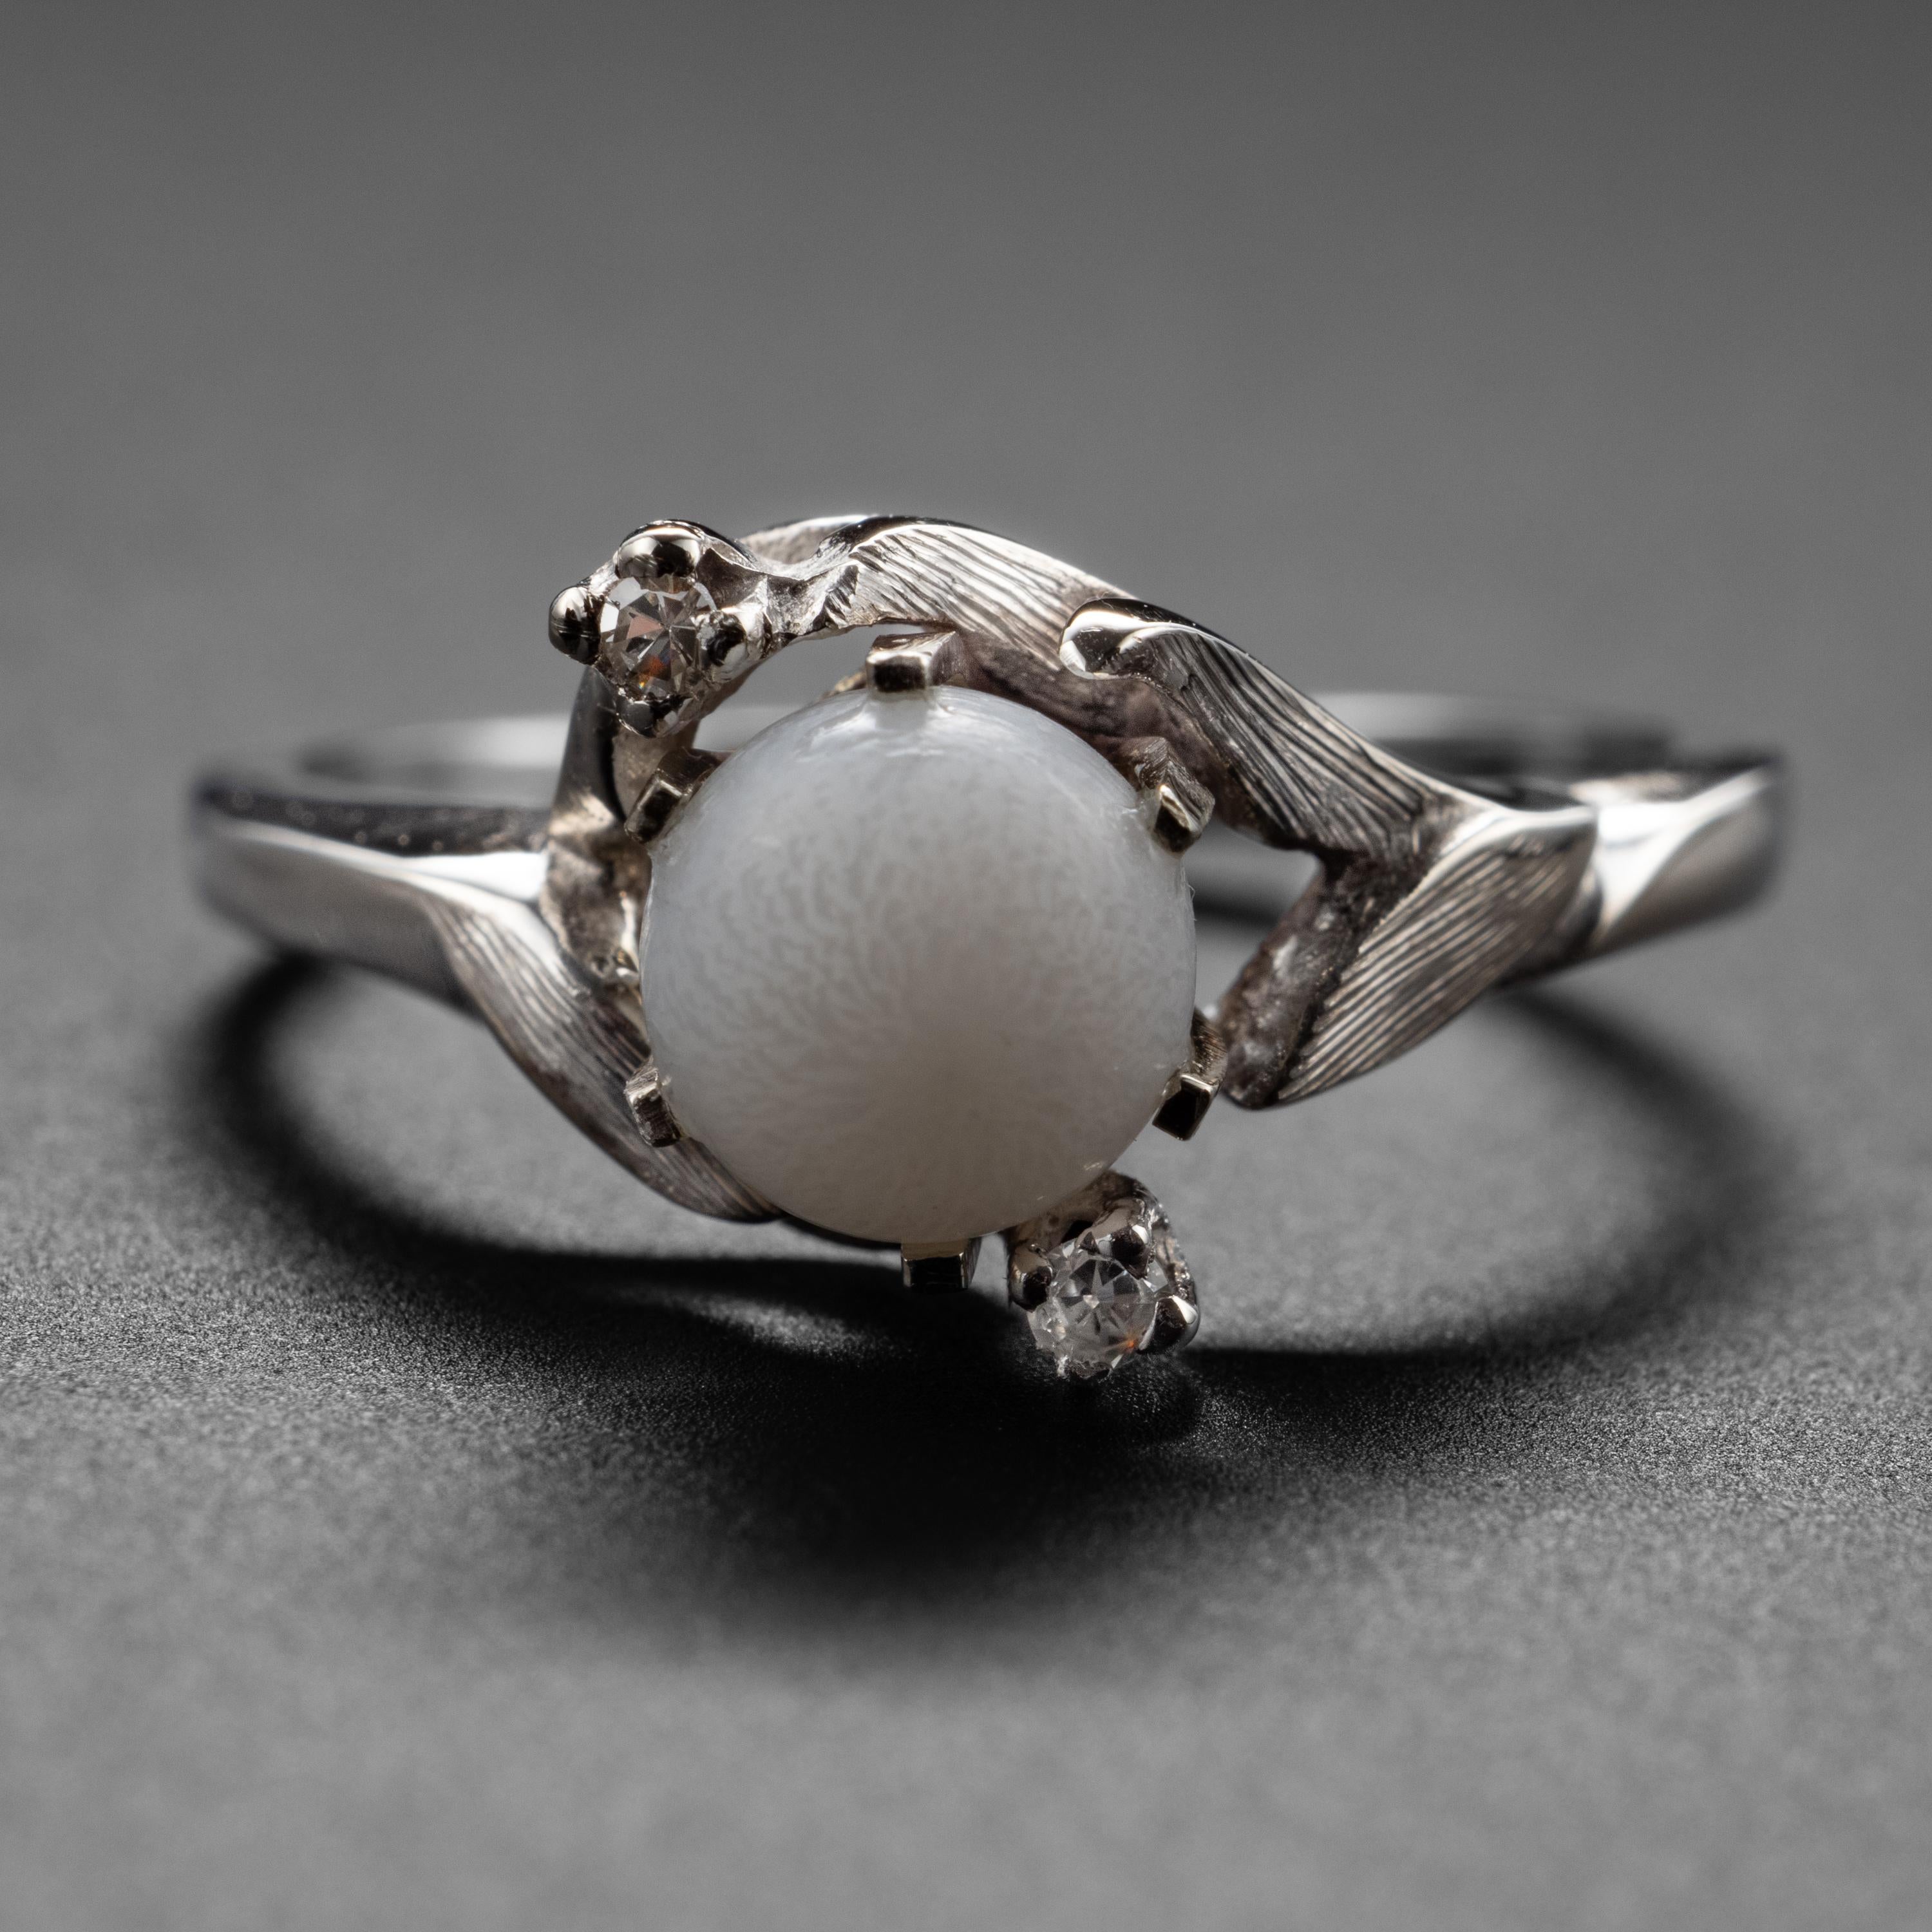 Recently mounted into a retro-era (early 1950s) 14K white gold and diamond ring is a fascinating and rare pearl you probably didn't know even existed: a natural saltwater clam pearl. Most people think only oysters produce pearls but any mollusk can